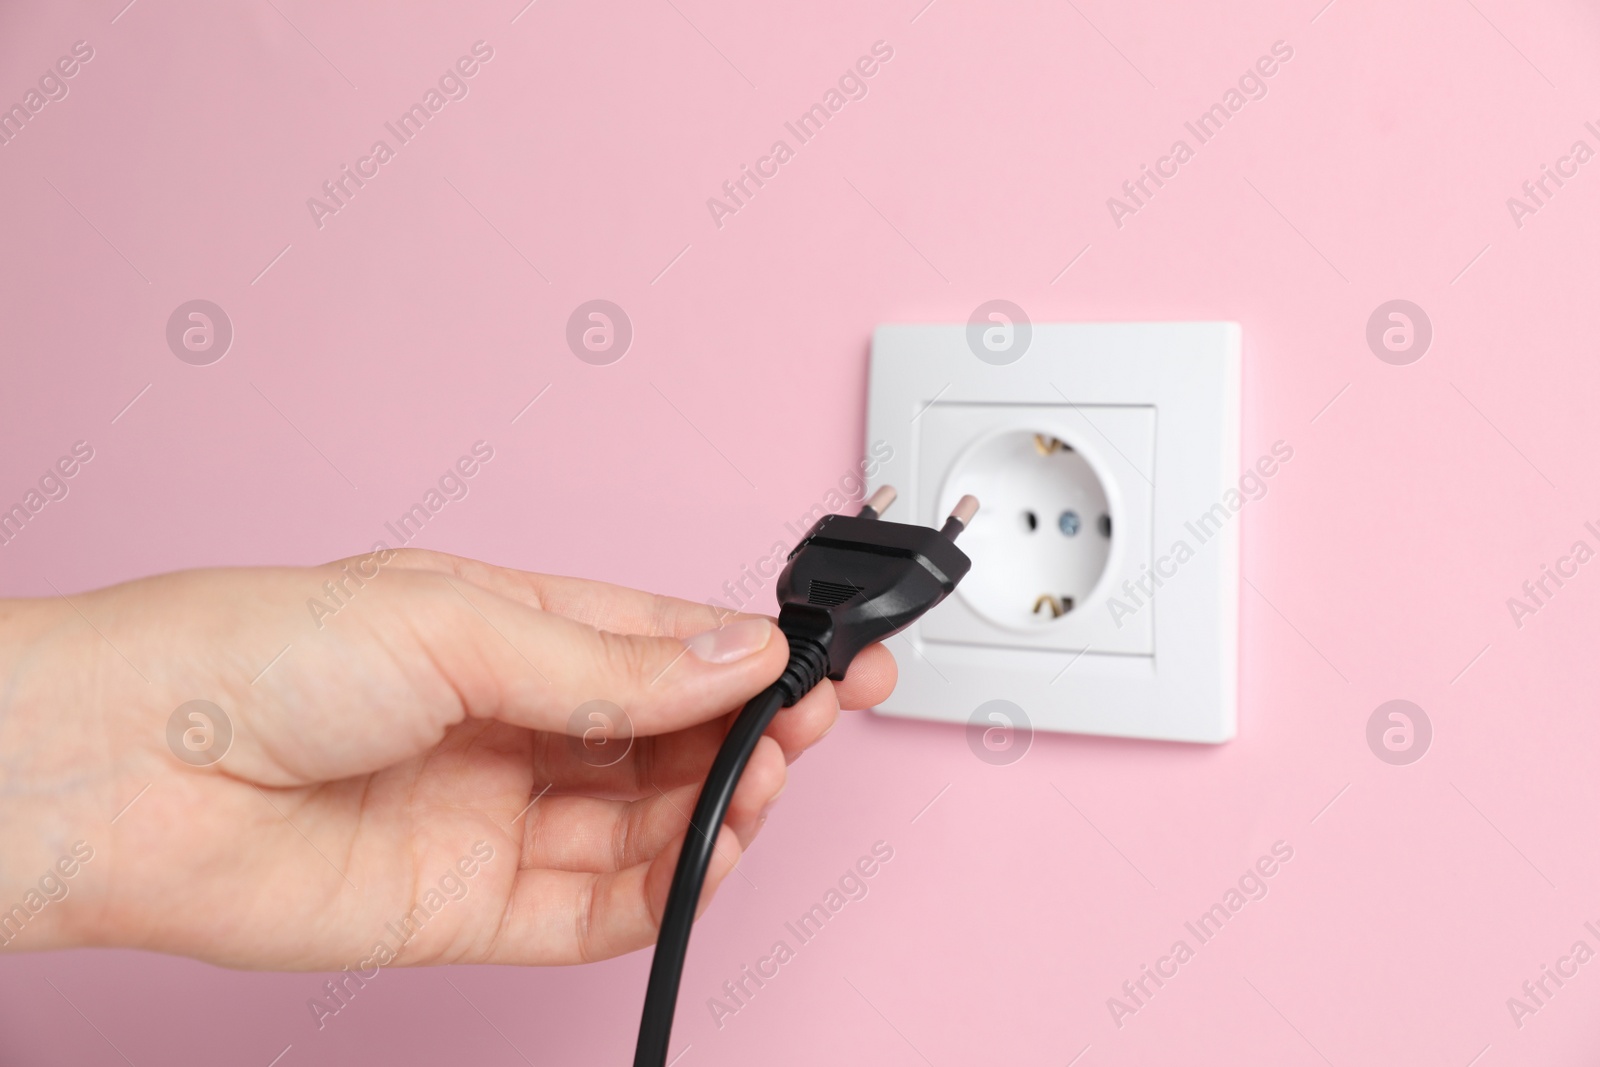 Photo of Woman inserting plug into power socket on pink wall, closeup. Electrical supply